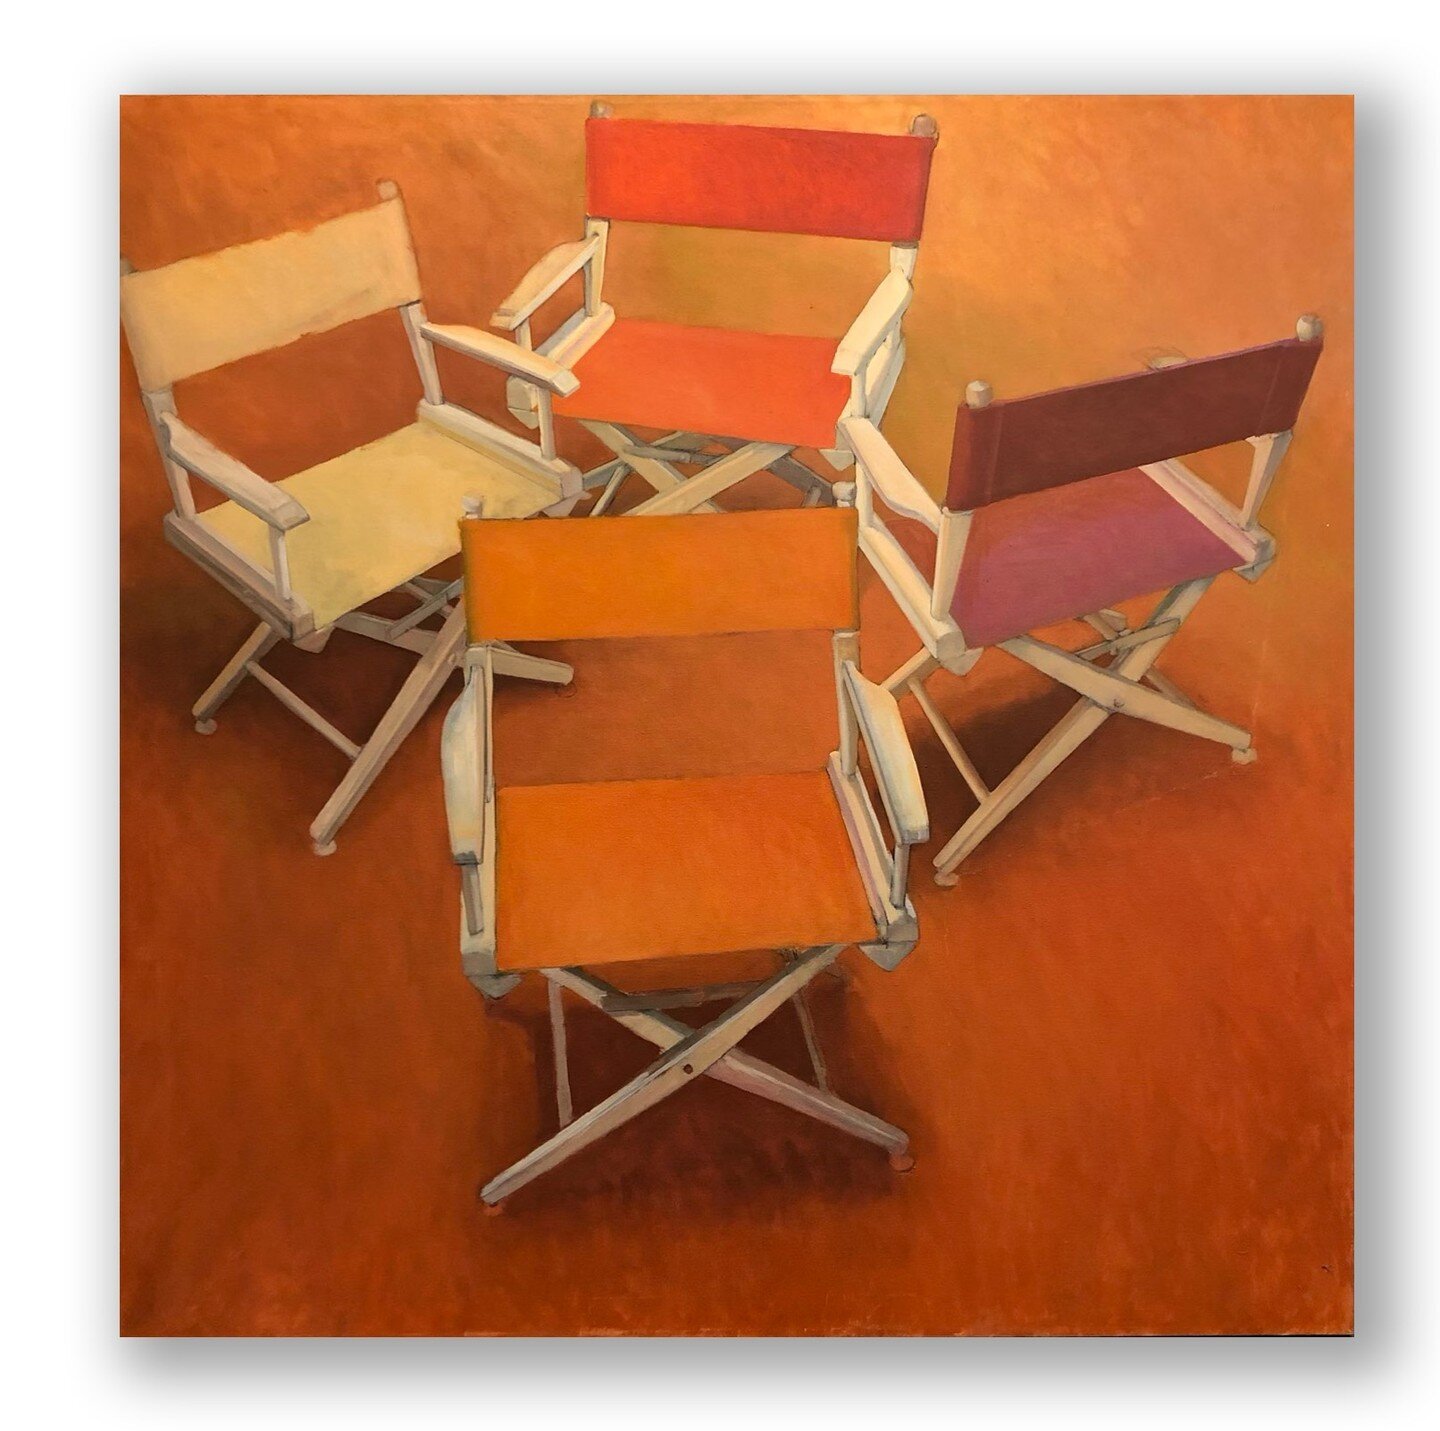 It's only Wednesday and I need a break! Lets have  a seat, shall we? This piece created by Robert M. Ellis, was created in Ellis's home studio near UNM, when Ellis was painting primarily more realistic still life paintings and landscape paintings. ⁠
